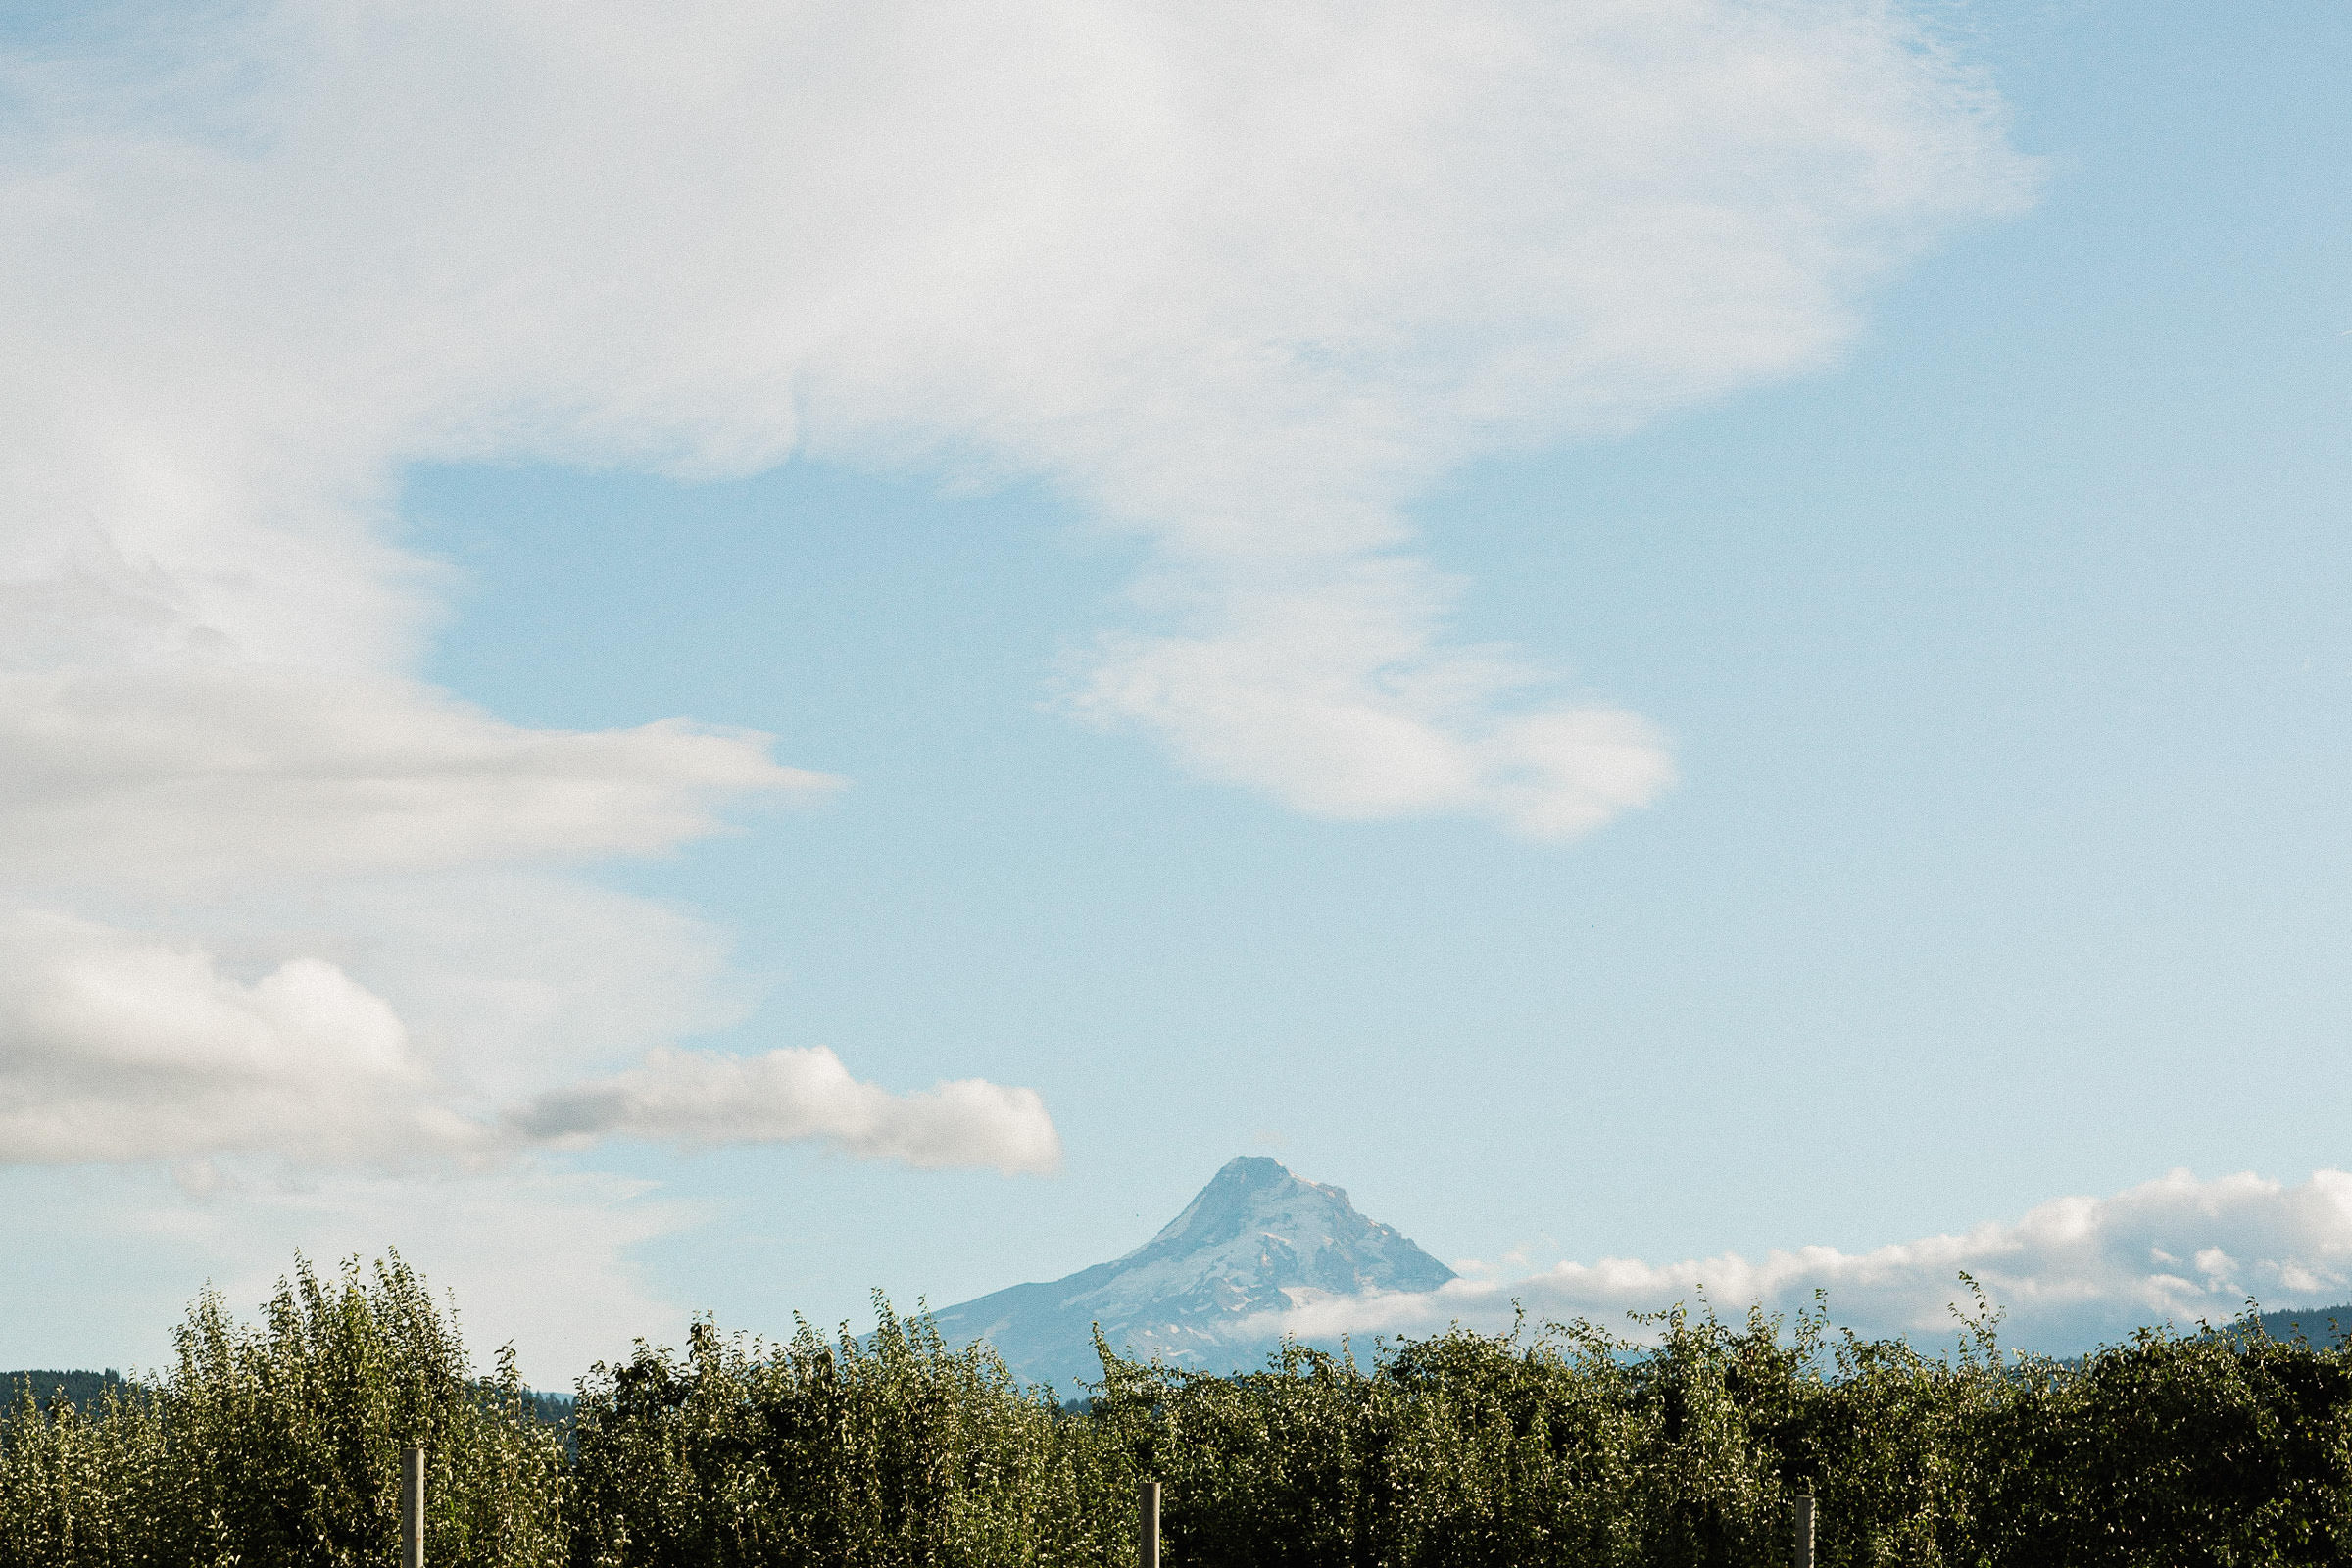 Mount Hood towers behind an orchard tree line against a cloudy blue sky